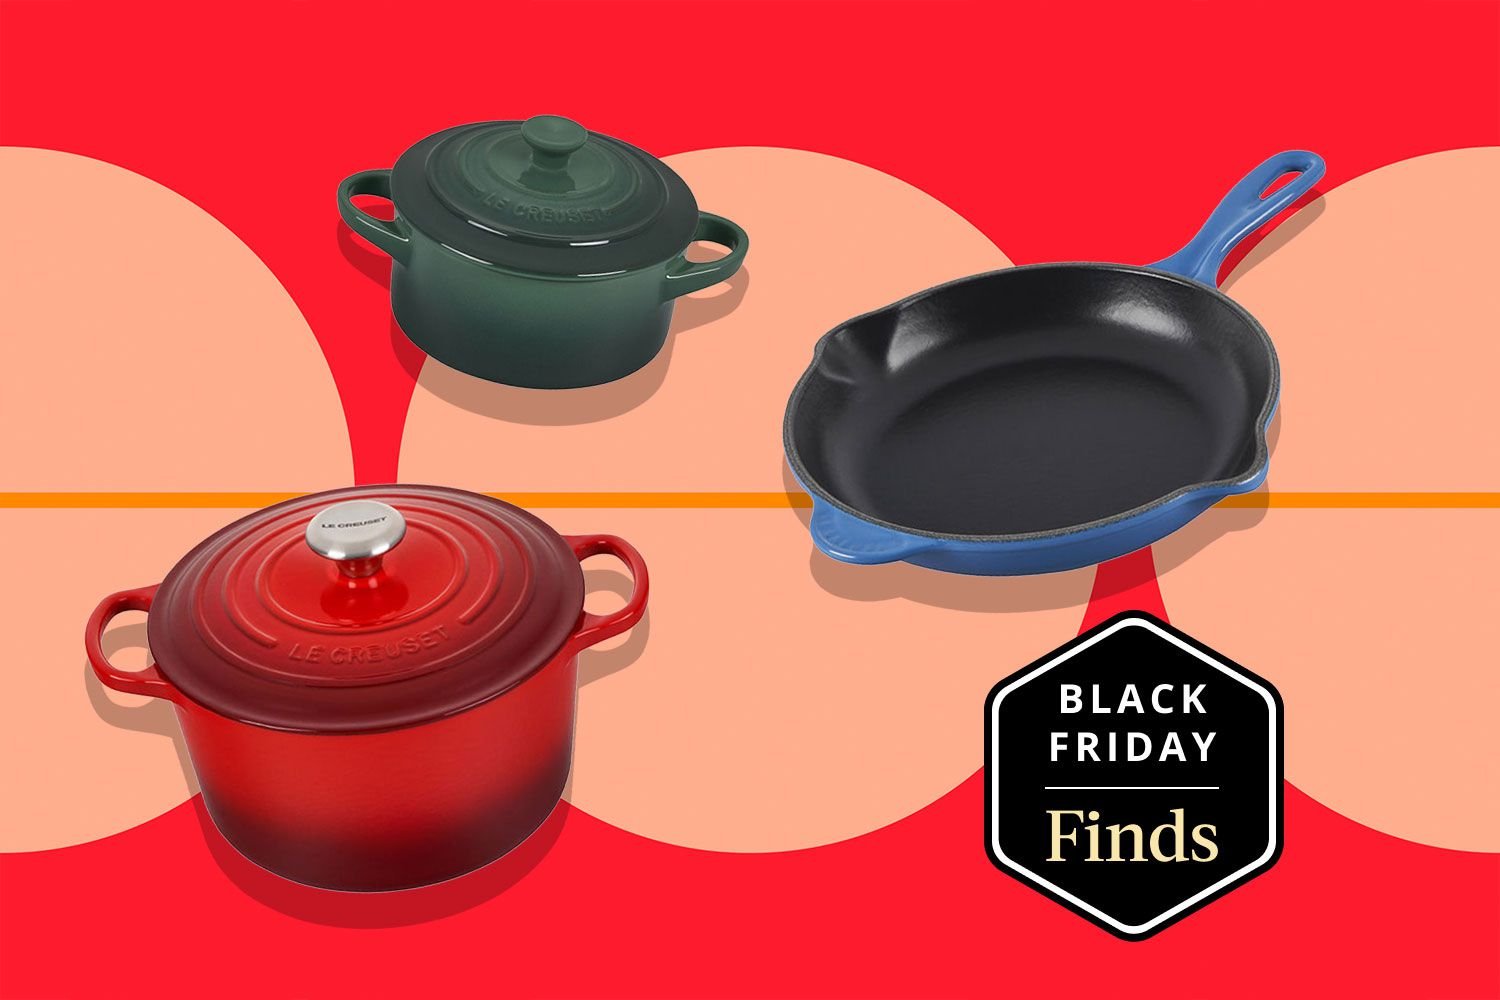 Le Creuset Cookware Is Nearly Half Off Right Now, and These Are the 12 Best Deals